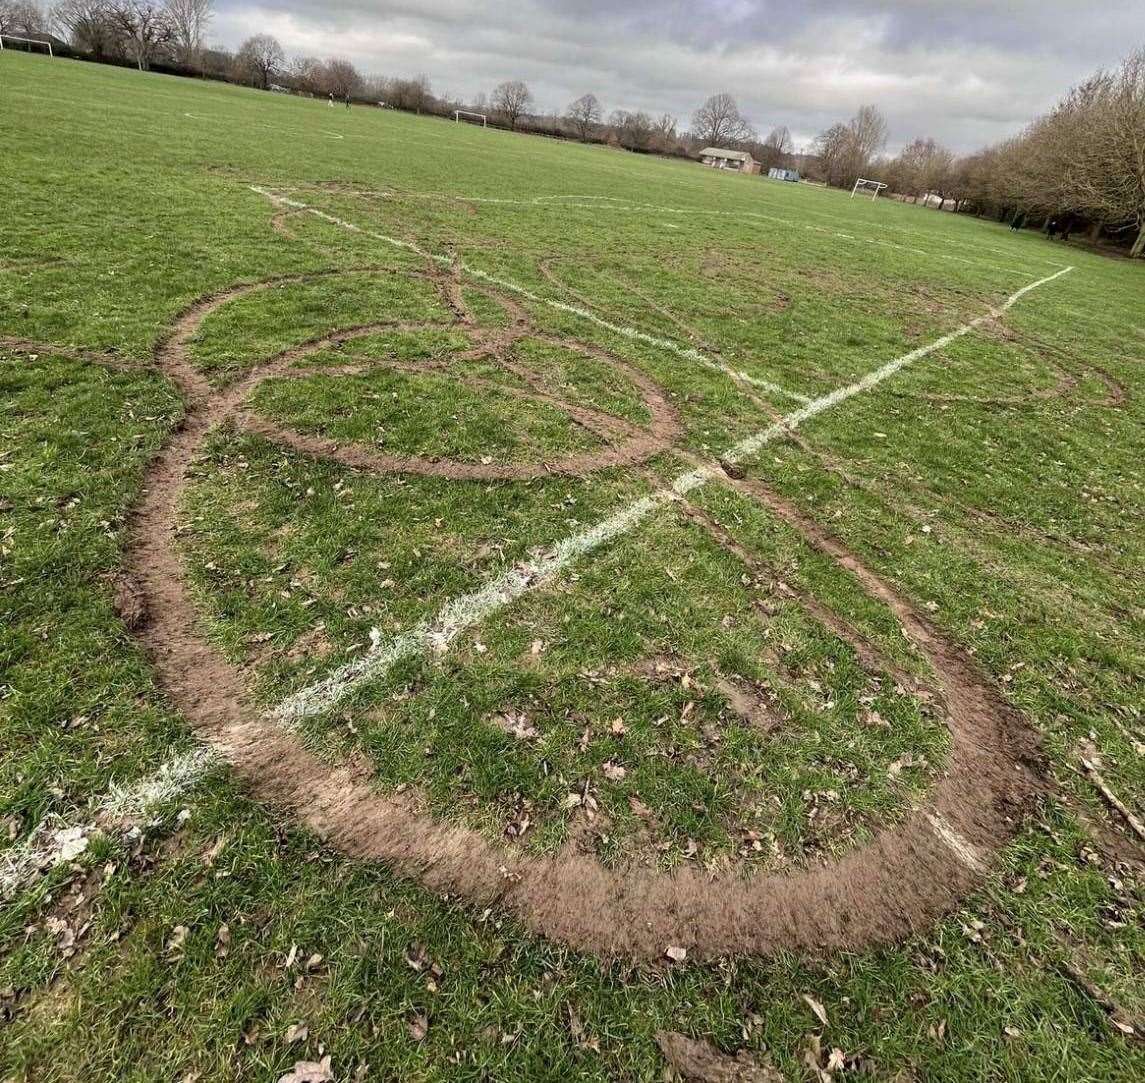 Some of the damage done to the Pilgrims FC football pitches